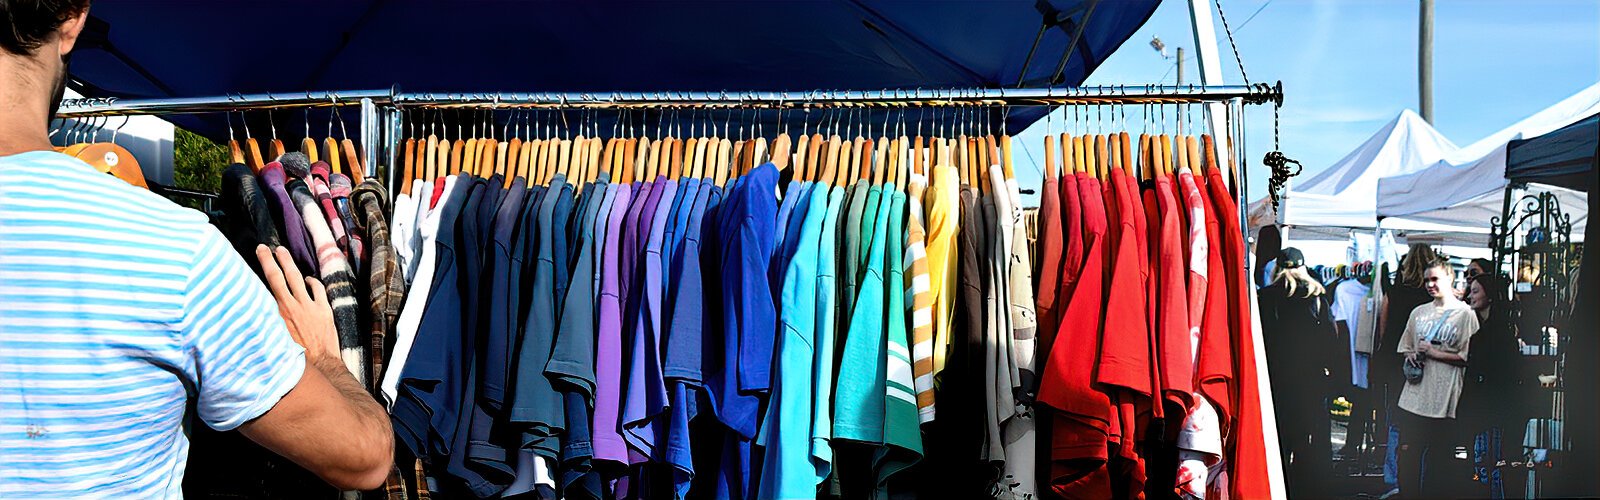 From November through April, it’s Indie Flea market season in St Pete on the first Sunday of the month and in Ybor City on the second Sunday of the month.